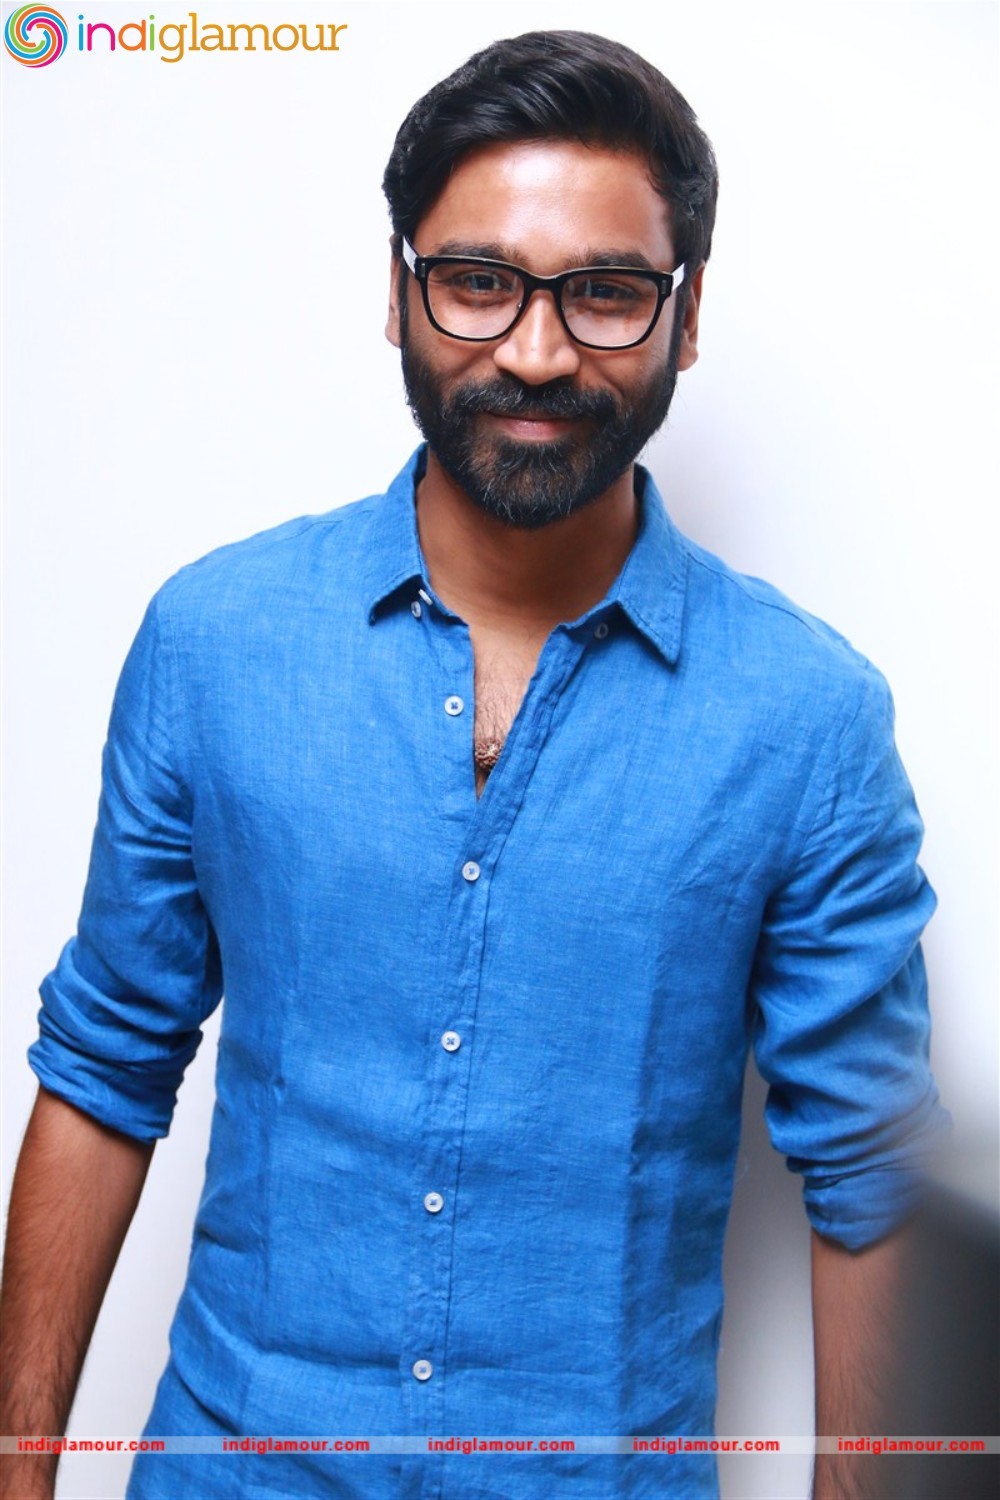 Dhanush Actor photos,images,pics,stills and picture - 17404 # 0 ...